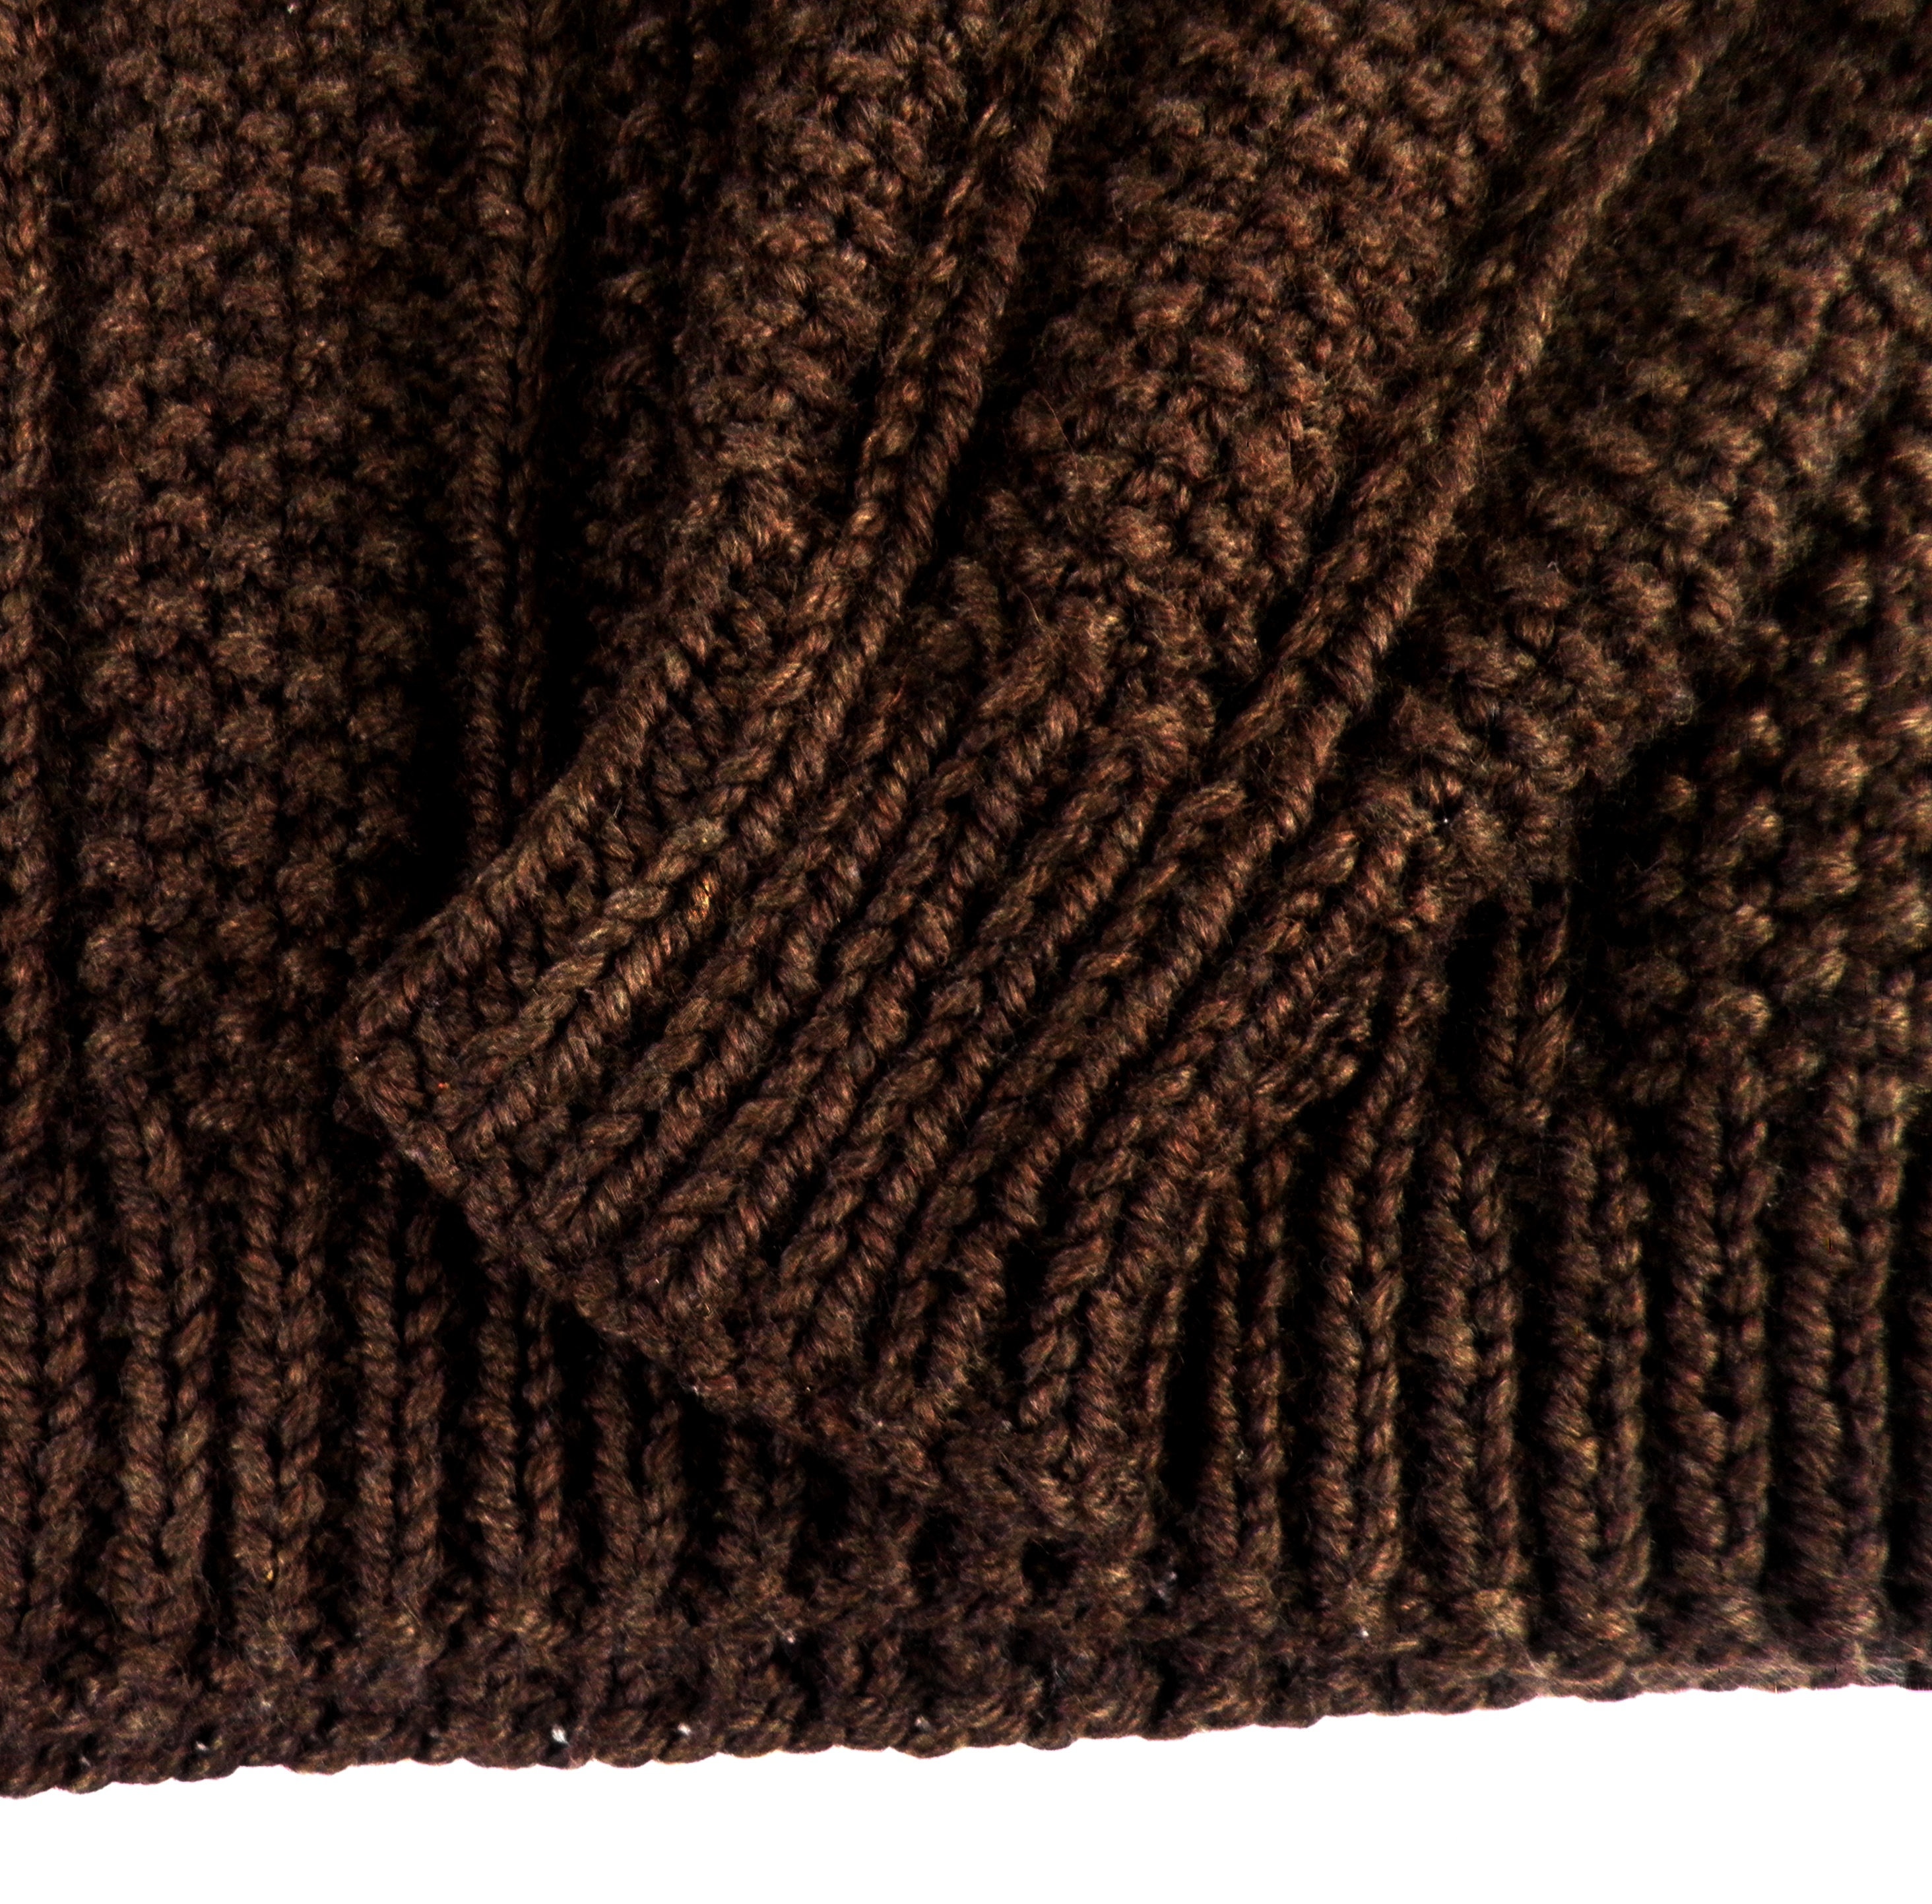 1970s Dark Chocolate Brown Hand Knit Chunky Knit Textural Wool | Etsy